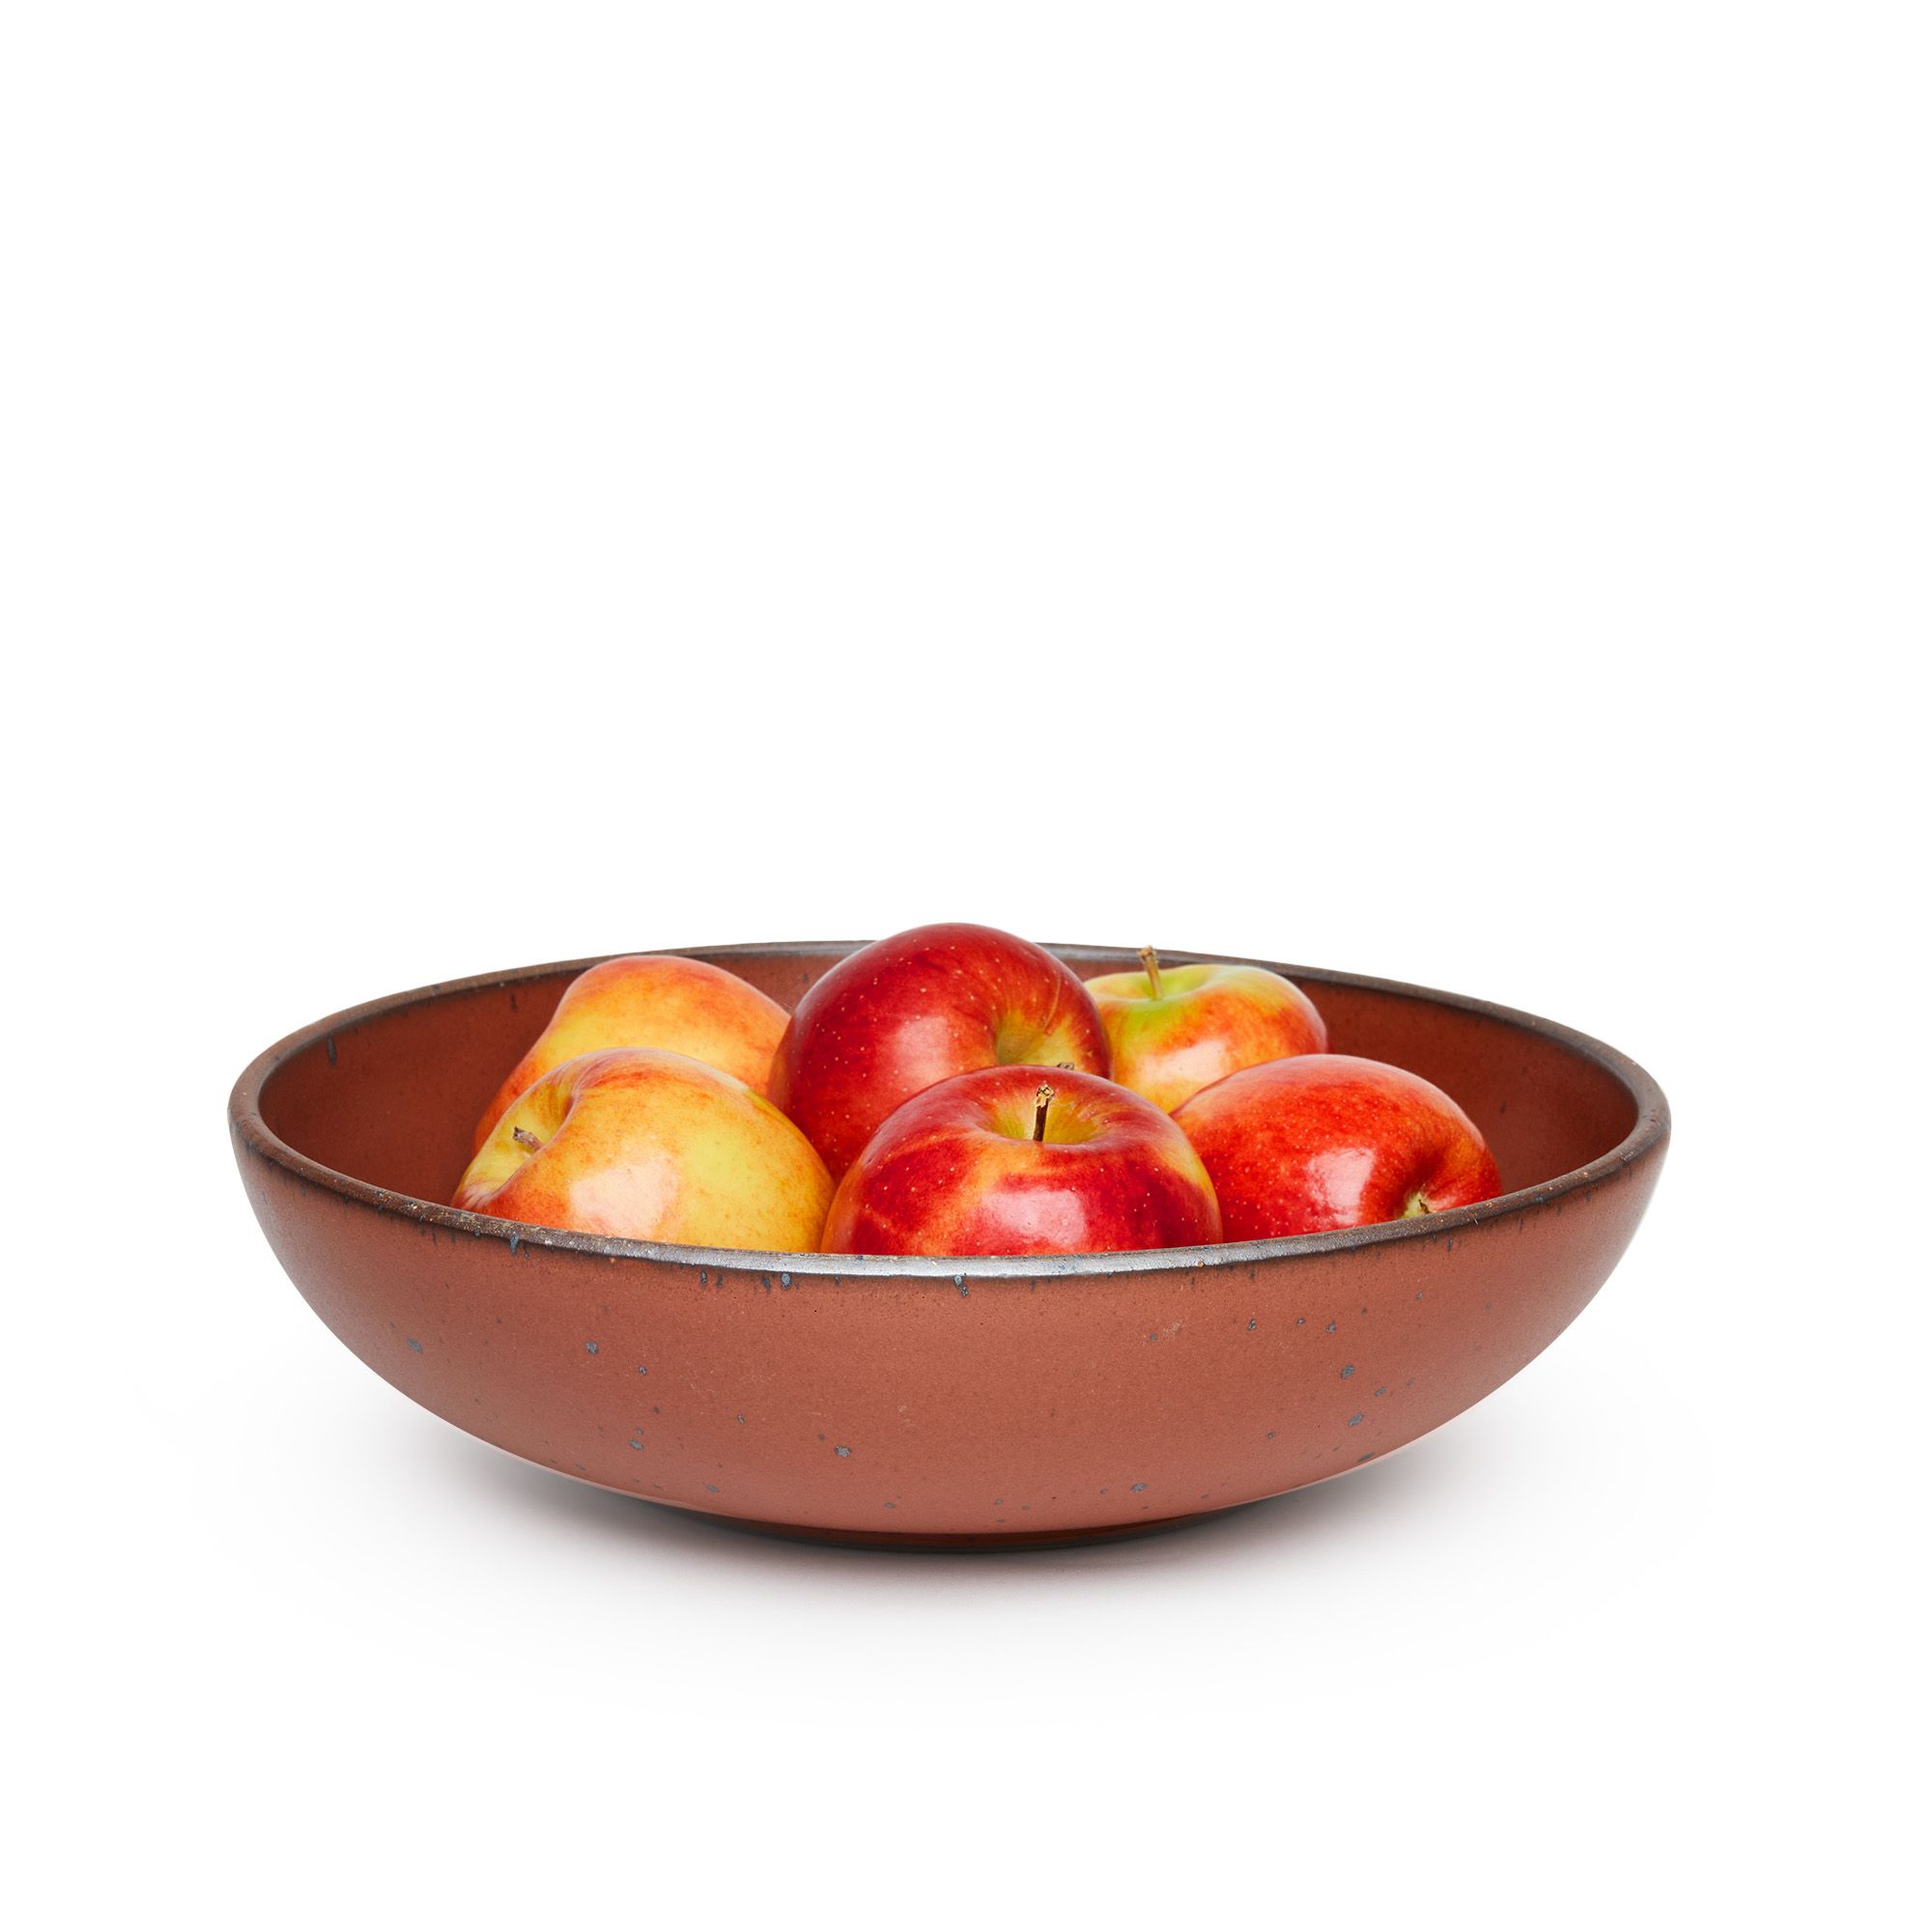 A large shallow serving ceramic bowl in a cool burnt terracotta color featuring iron speckles and an unglazed rim, filled with apples